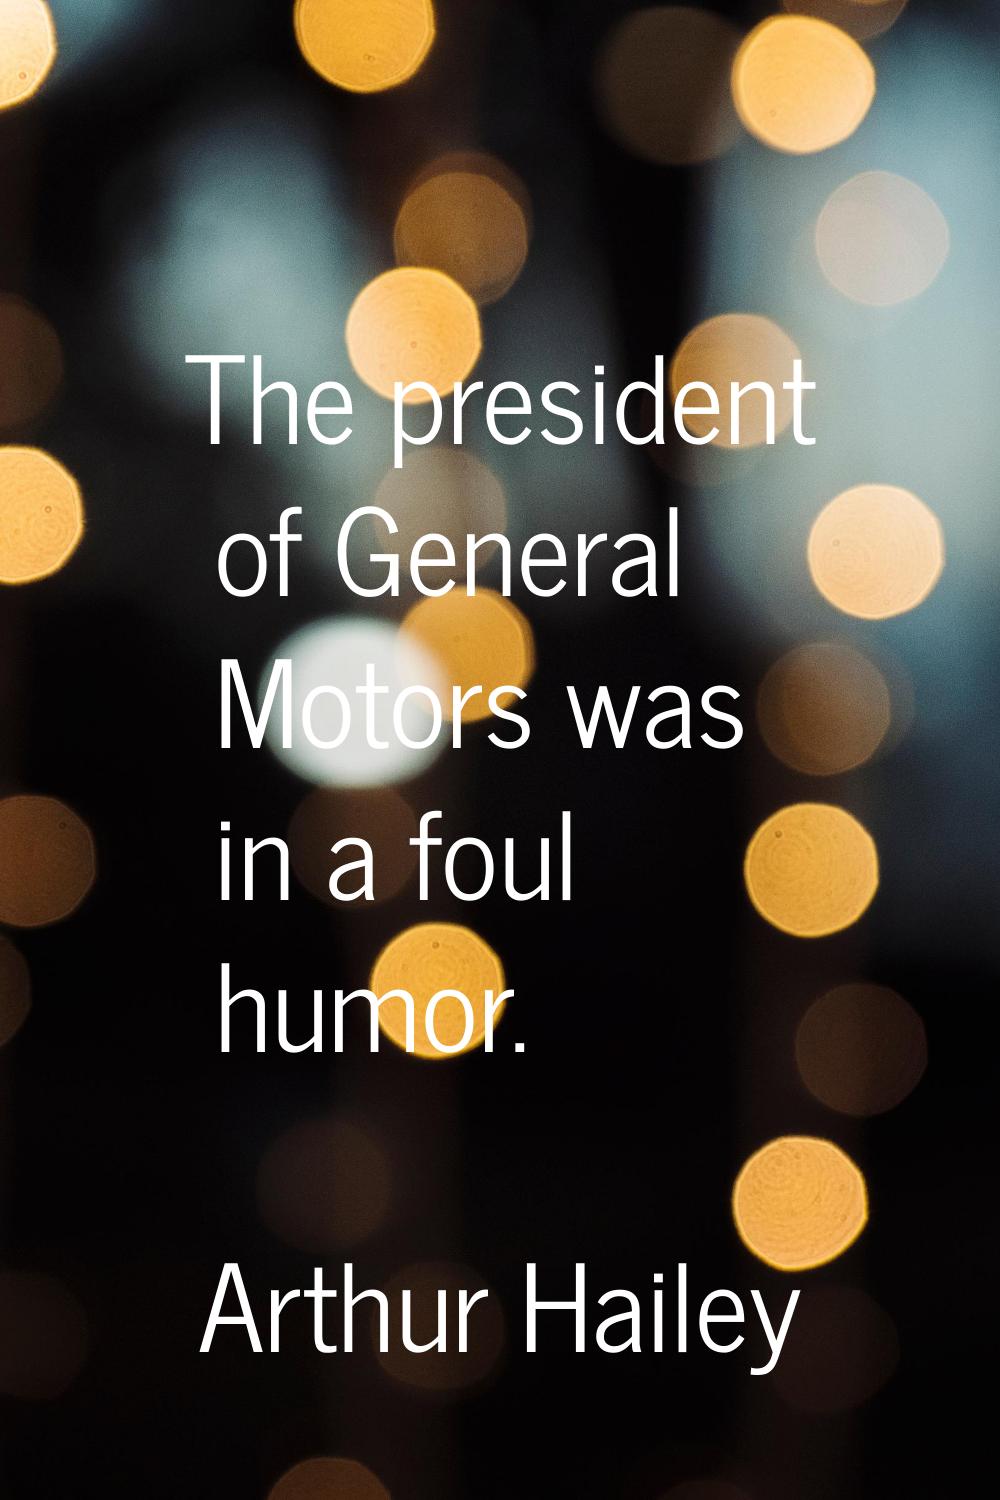 The president of General Motors was in a foul humor.